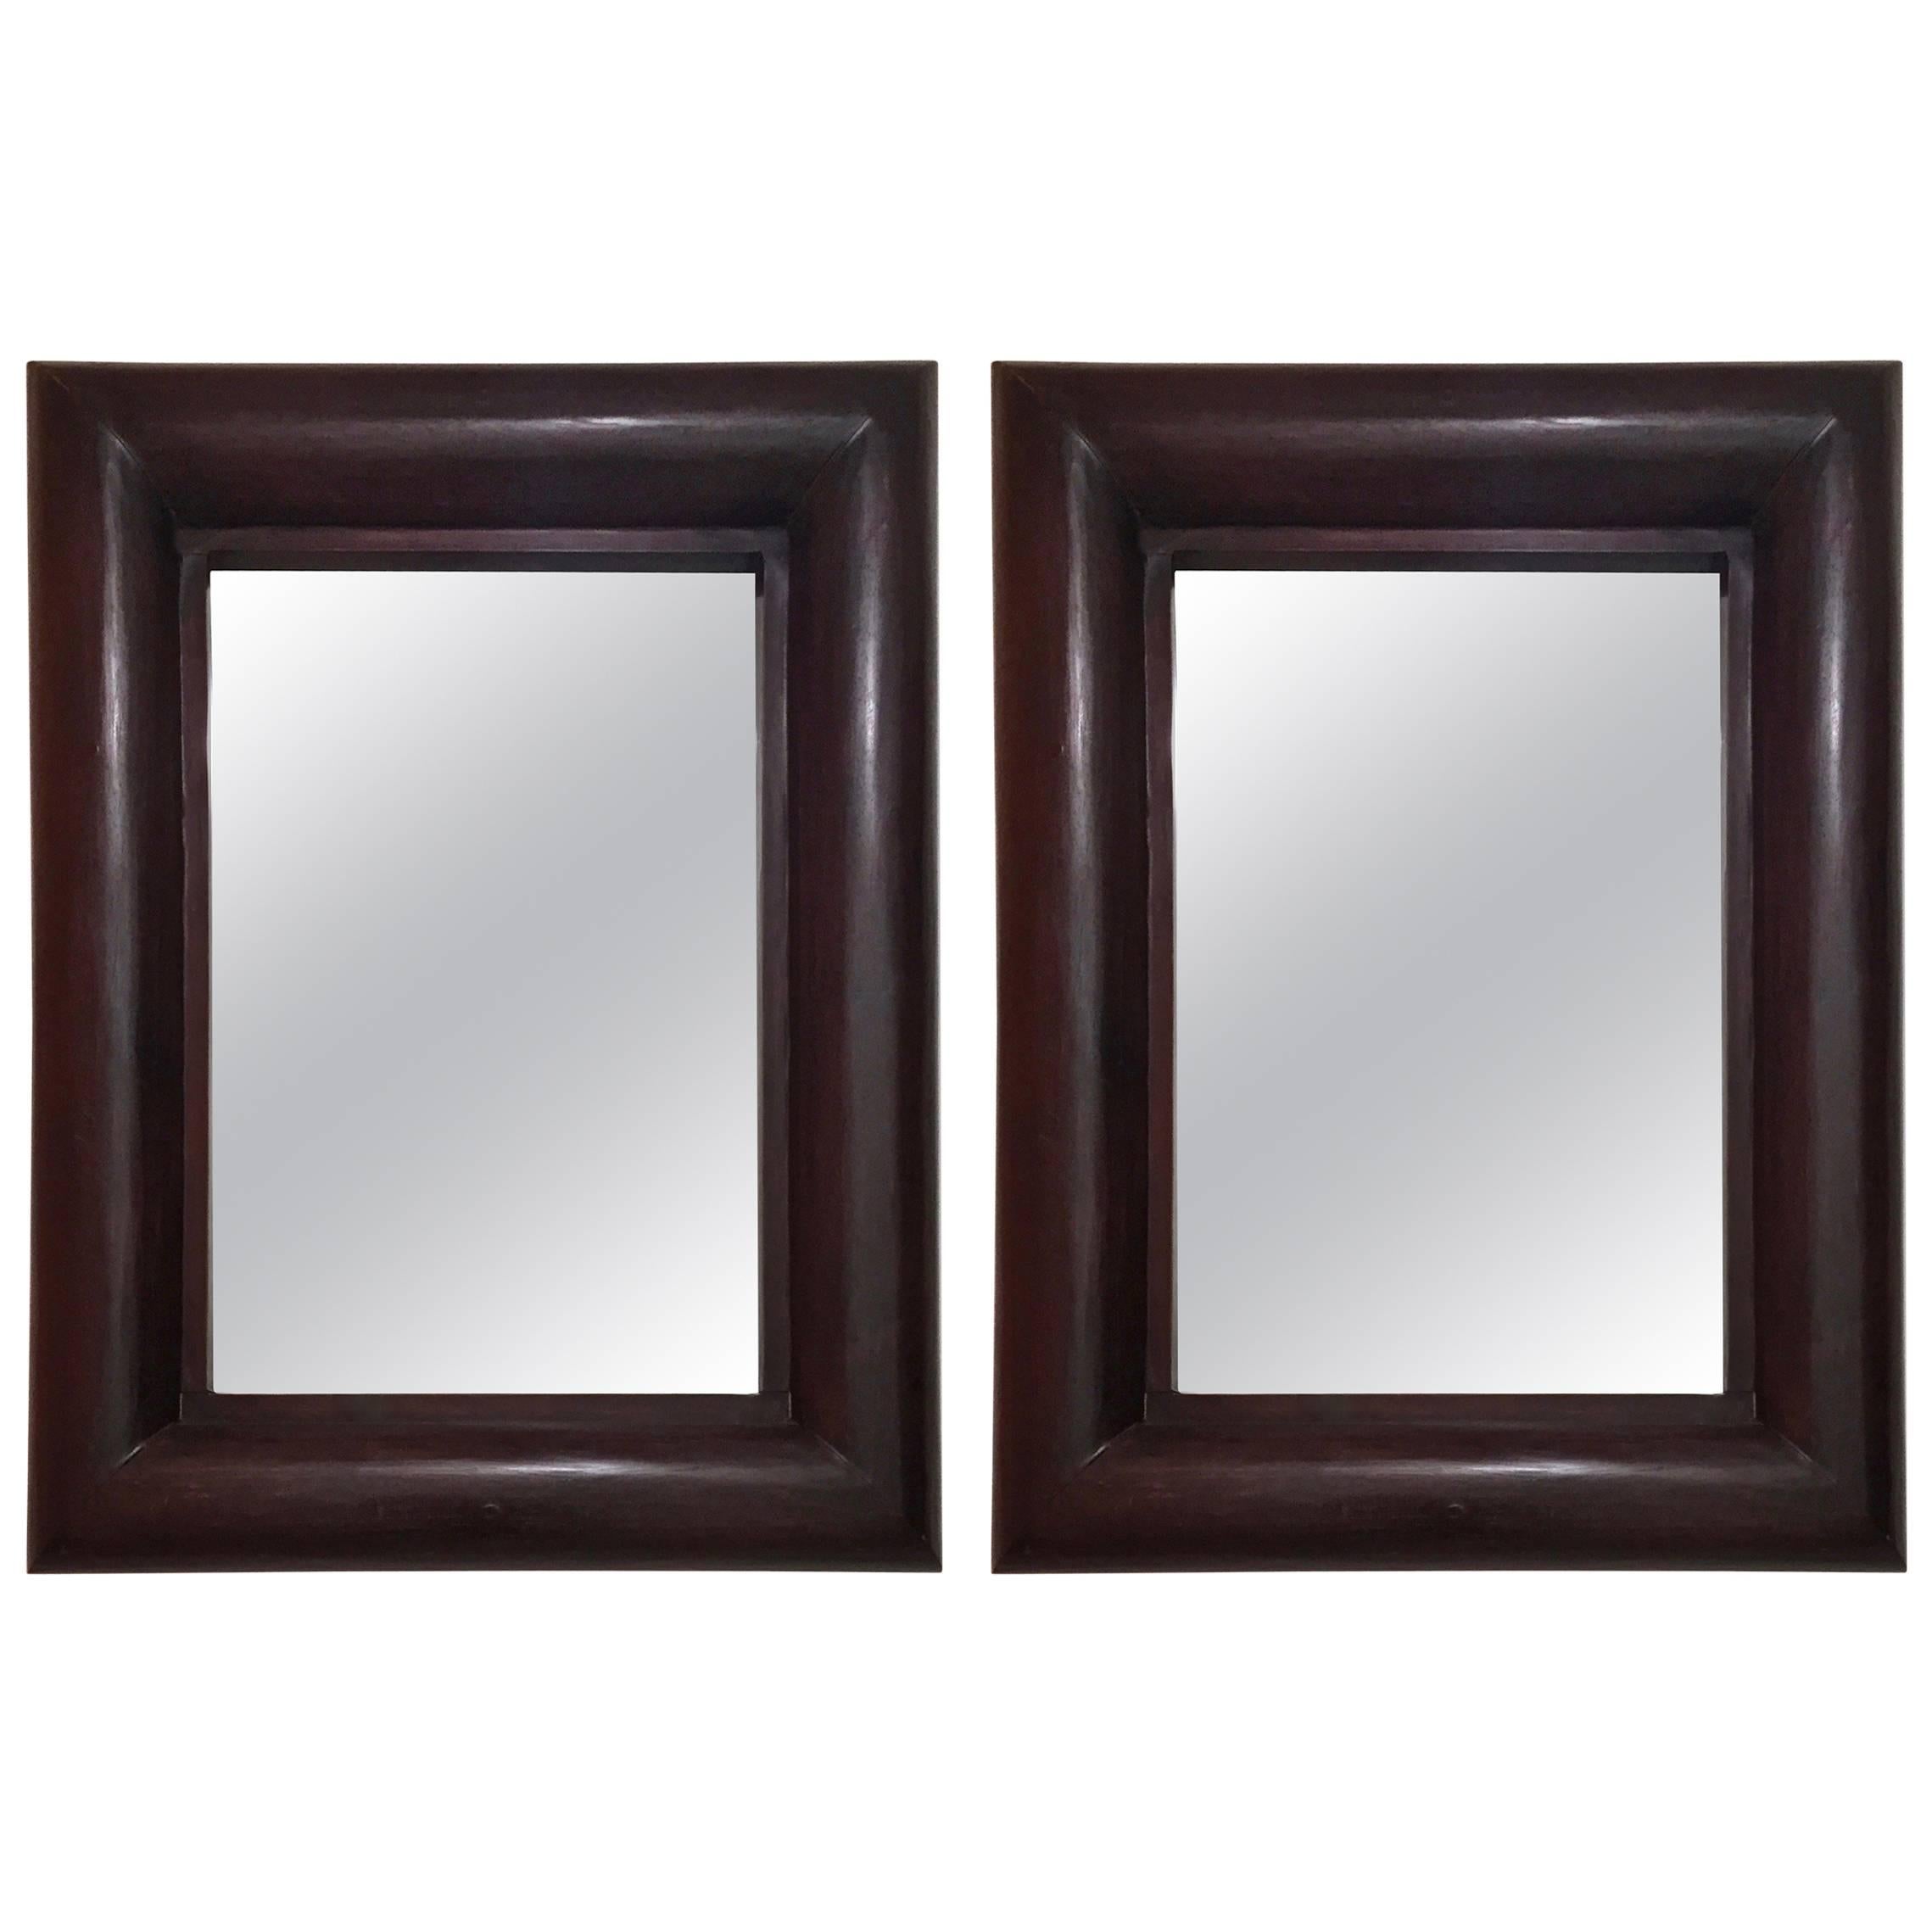 Pair of Solid Wooden Framed Mirrors, Indonesia 1990